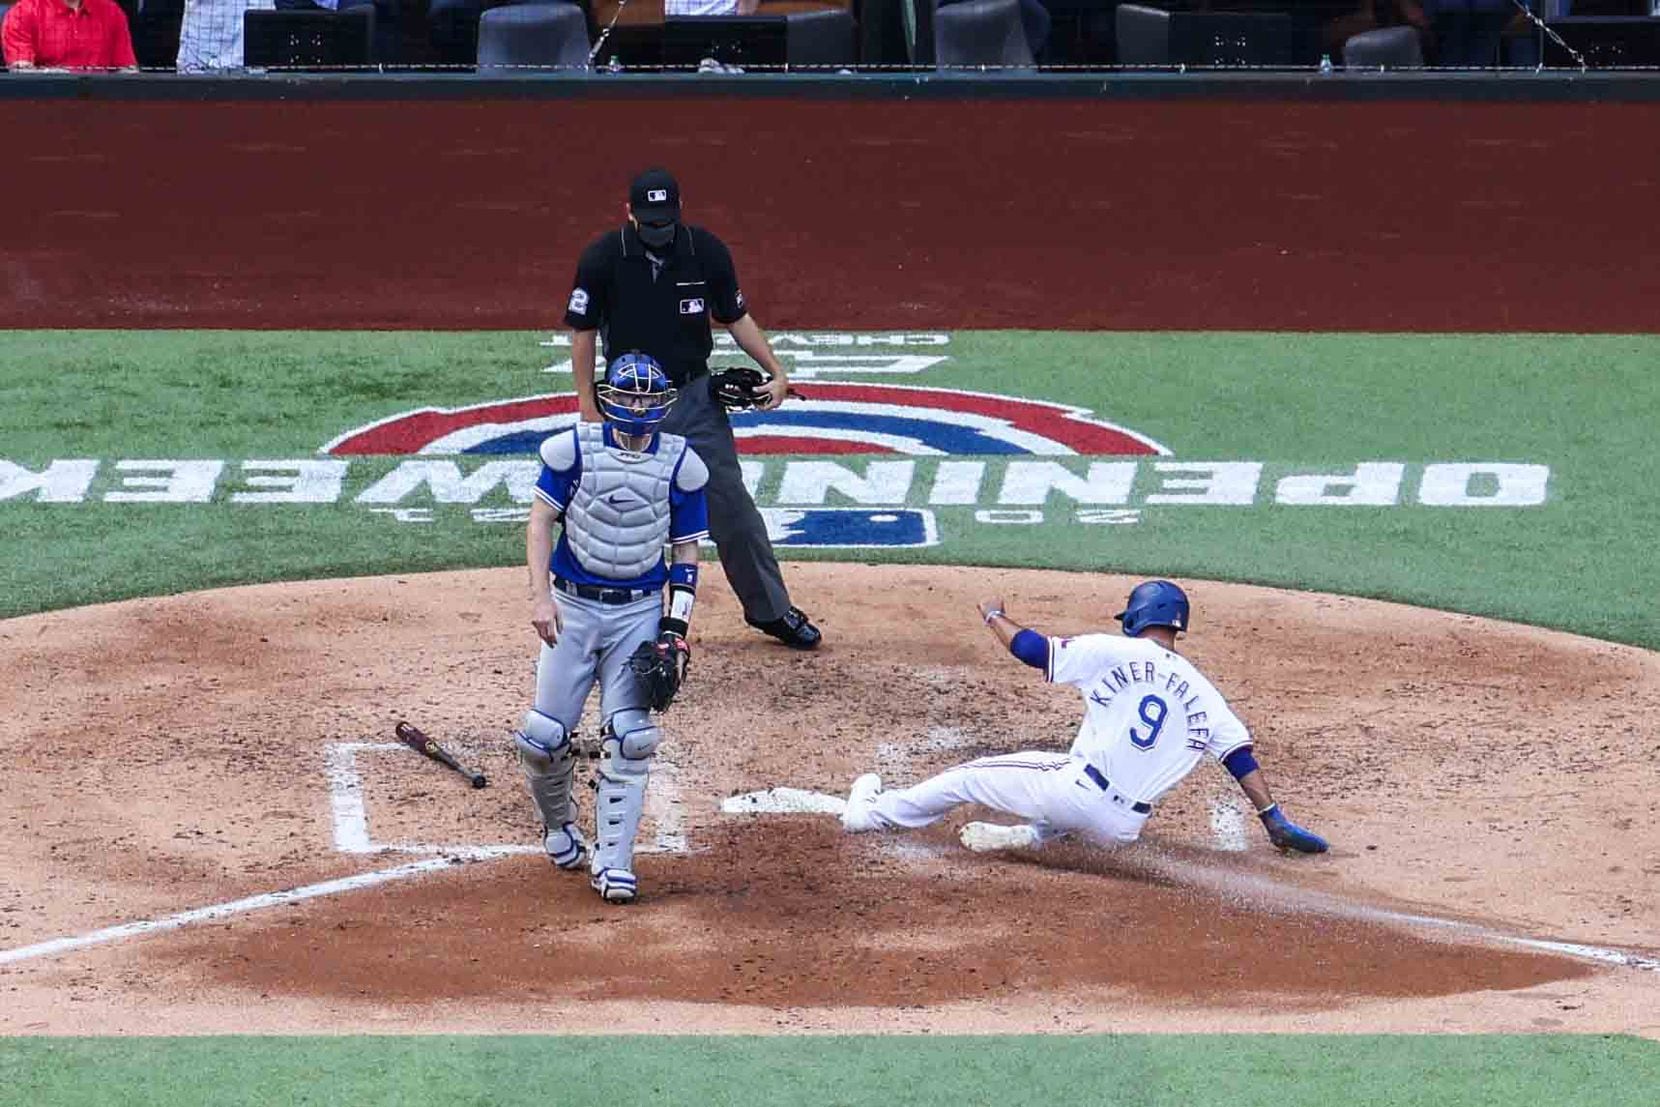 Texas Rangers' infielder Isiah Kiner-Falefa No. 9 slides to home plate to add the first run for the team during 4th inn against Toronto Blue Jays at the Globe Life Field during opening day in Arlington, Texas on Monday, April 5, 2021. (Lola Gomez/The Dallas Morning News)